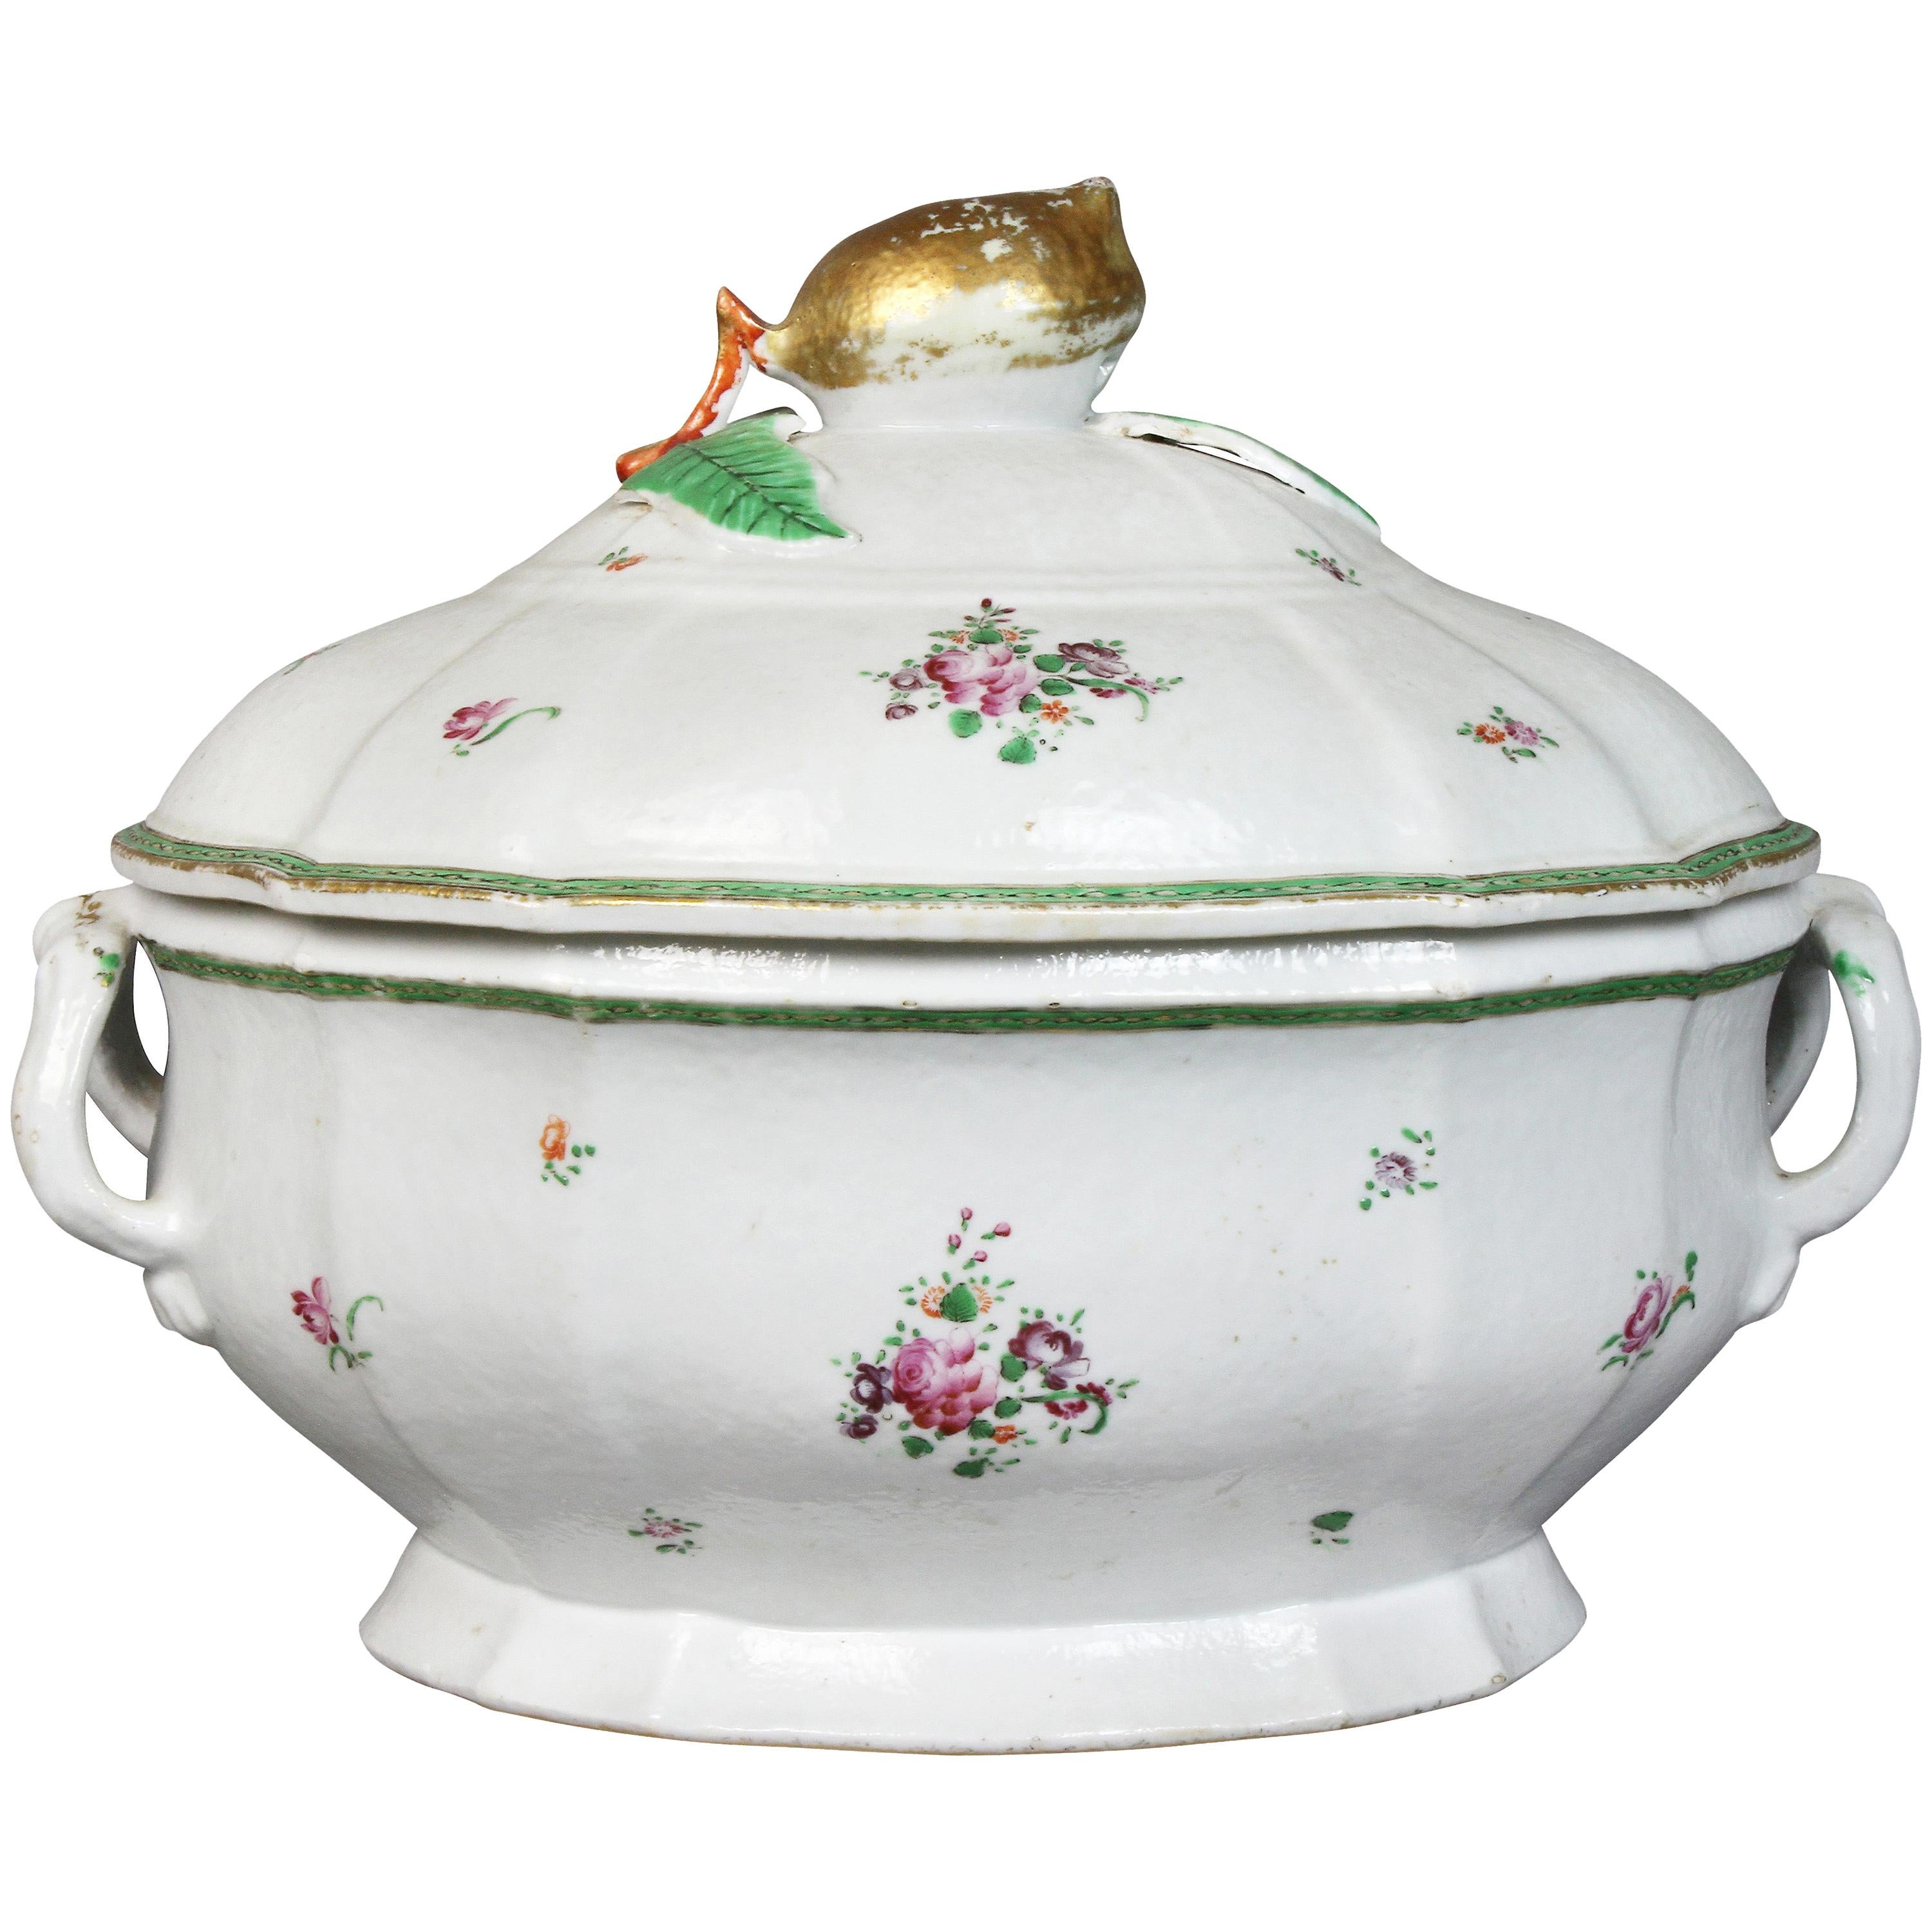 Chinese Export Porcelain Soup Tureen For Sale